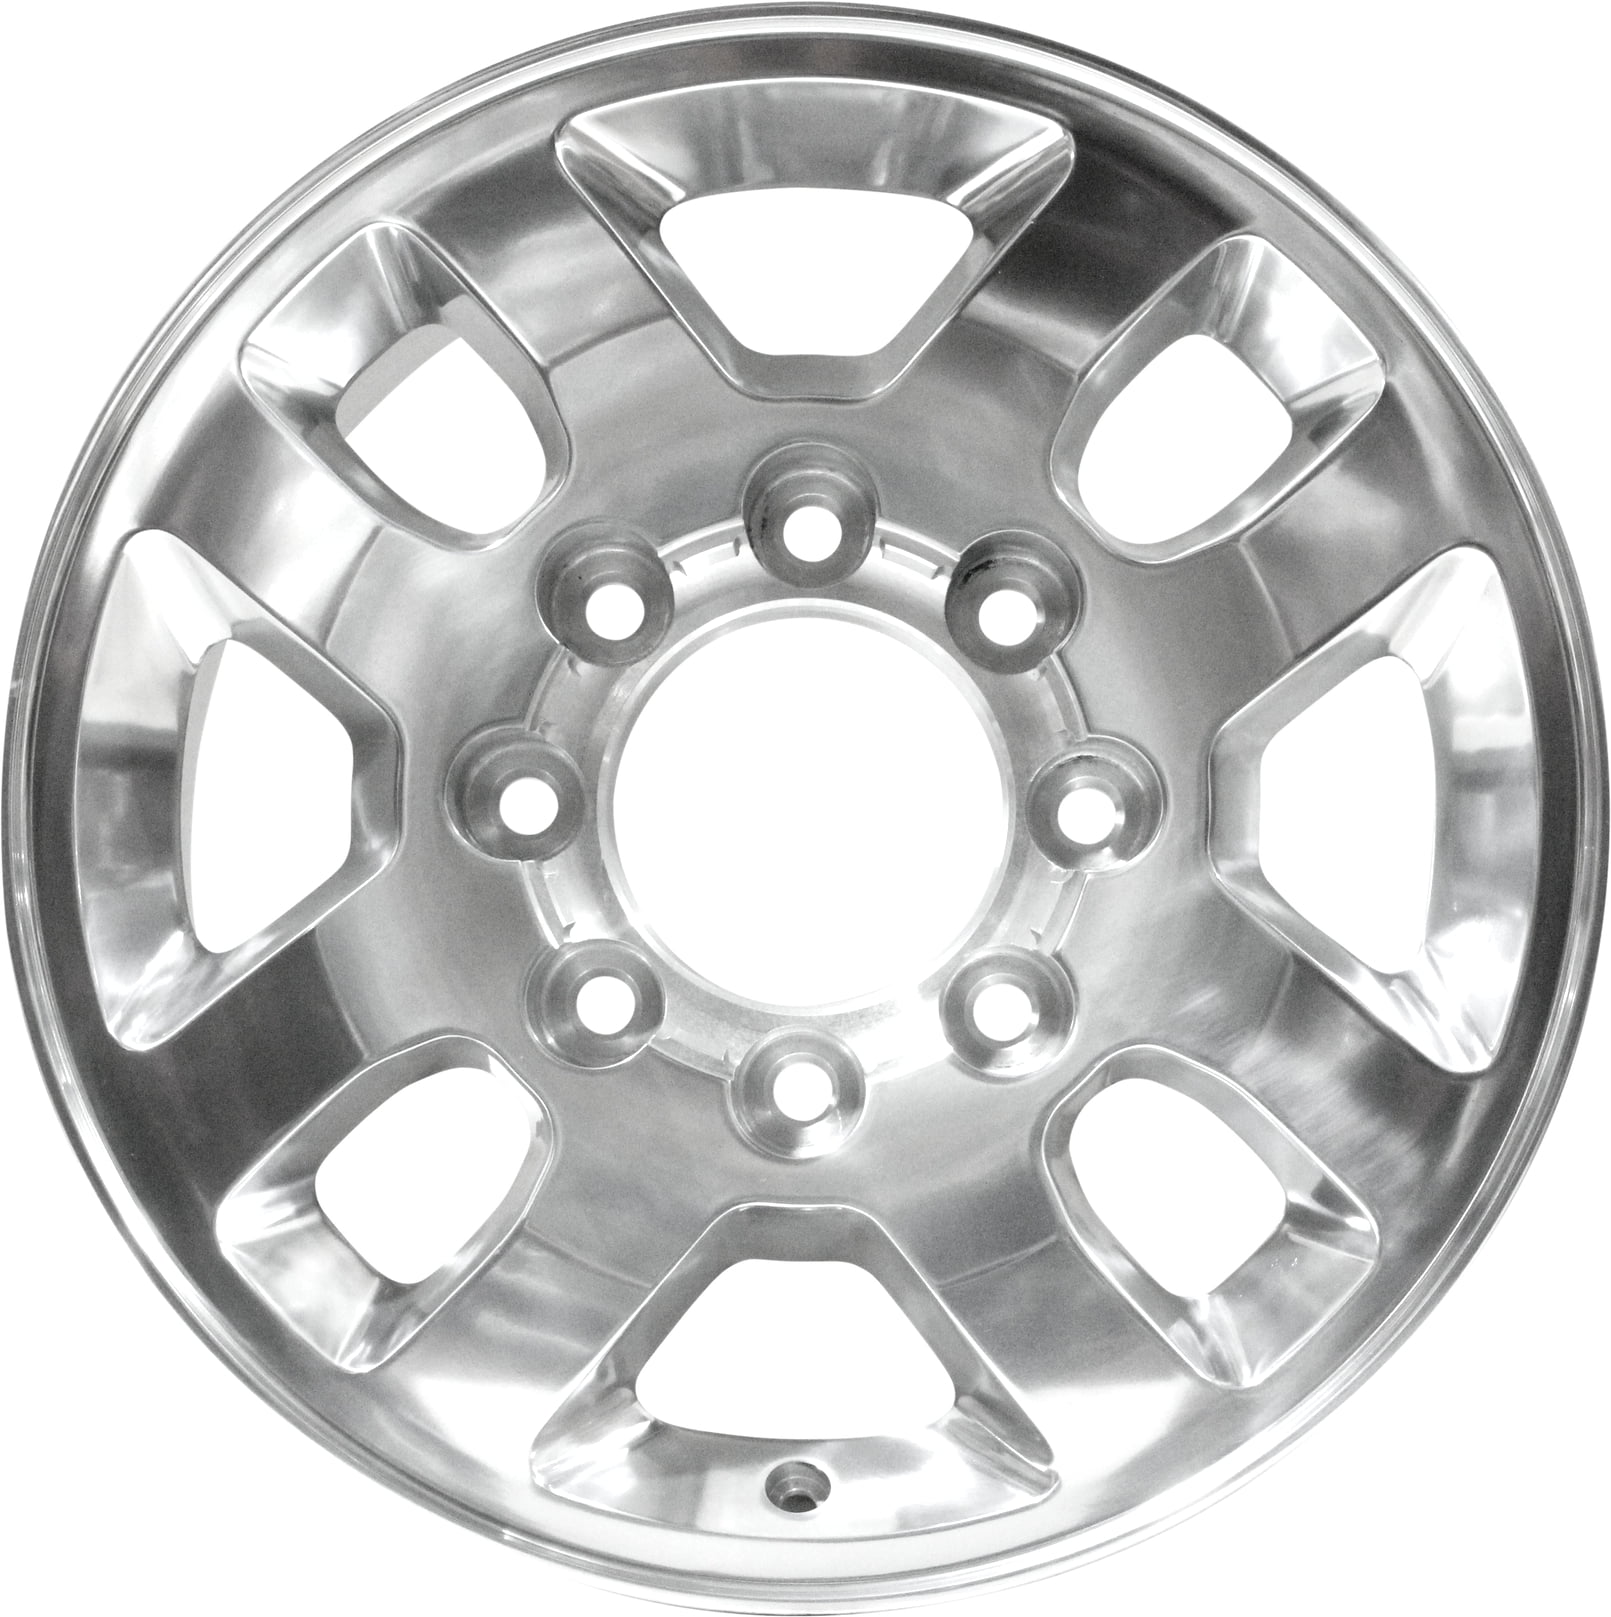 Aluminum Wheel Rim 18 inch for 11-17 Bill Smith Auto Parts Chevy 17 Or 18 Inch Wheels For Truck